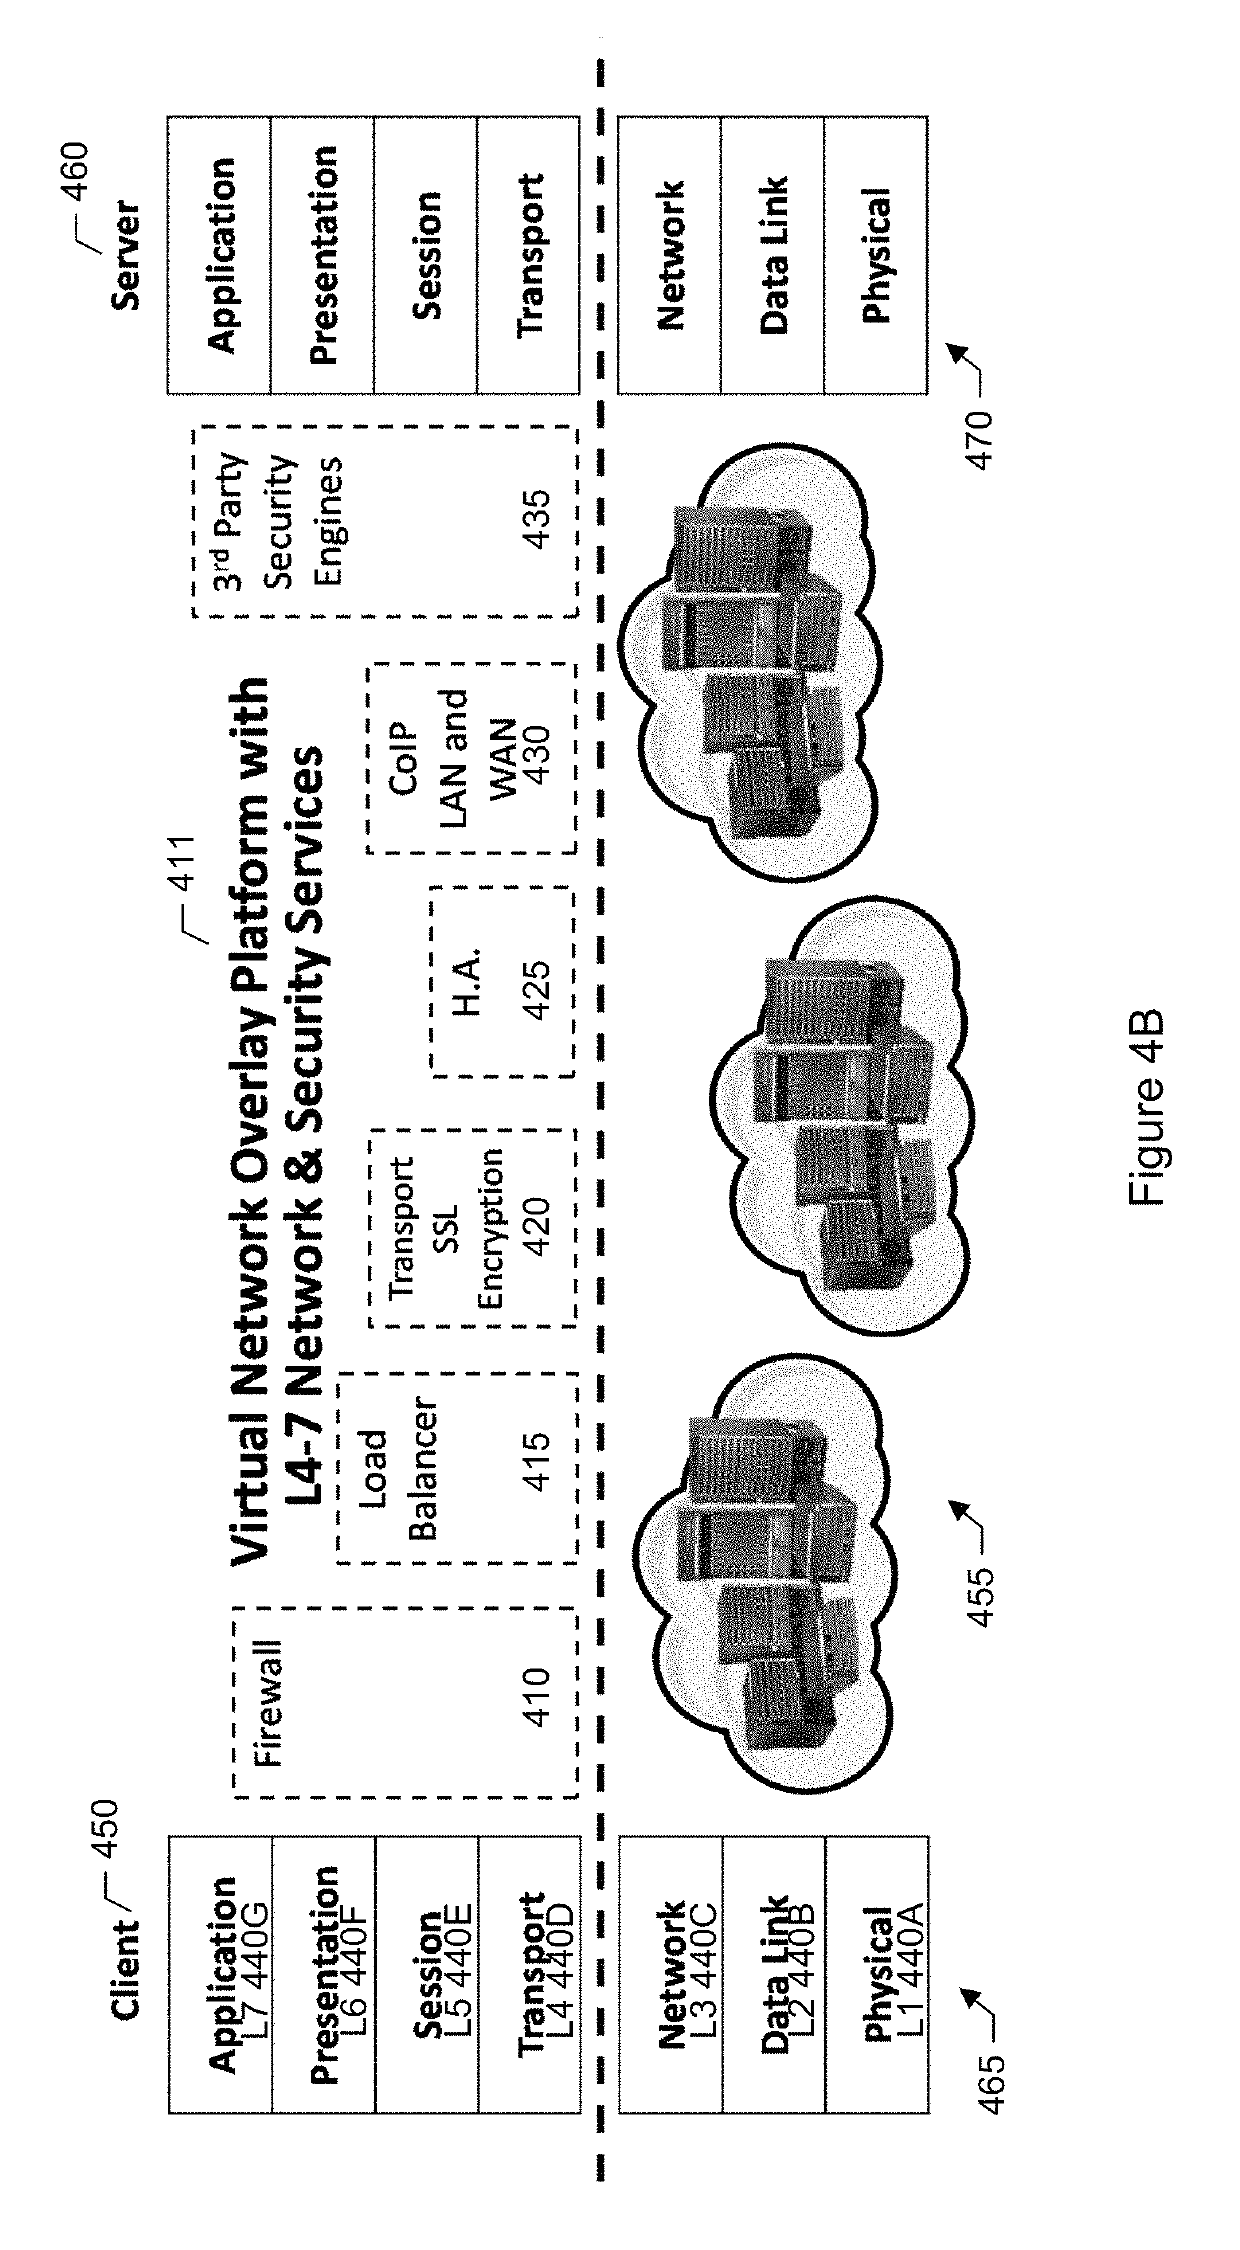 Distributed firewall security system that extends across different cloud computing networks